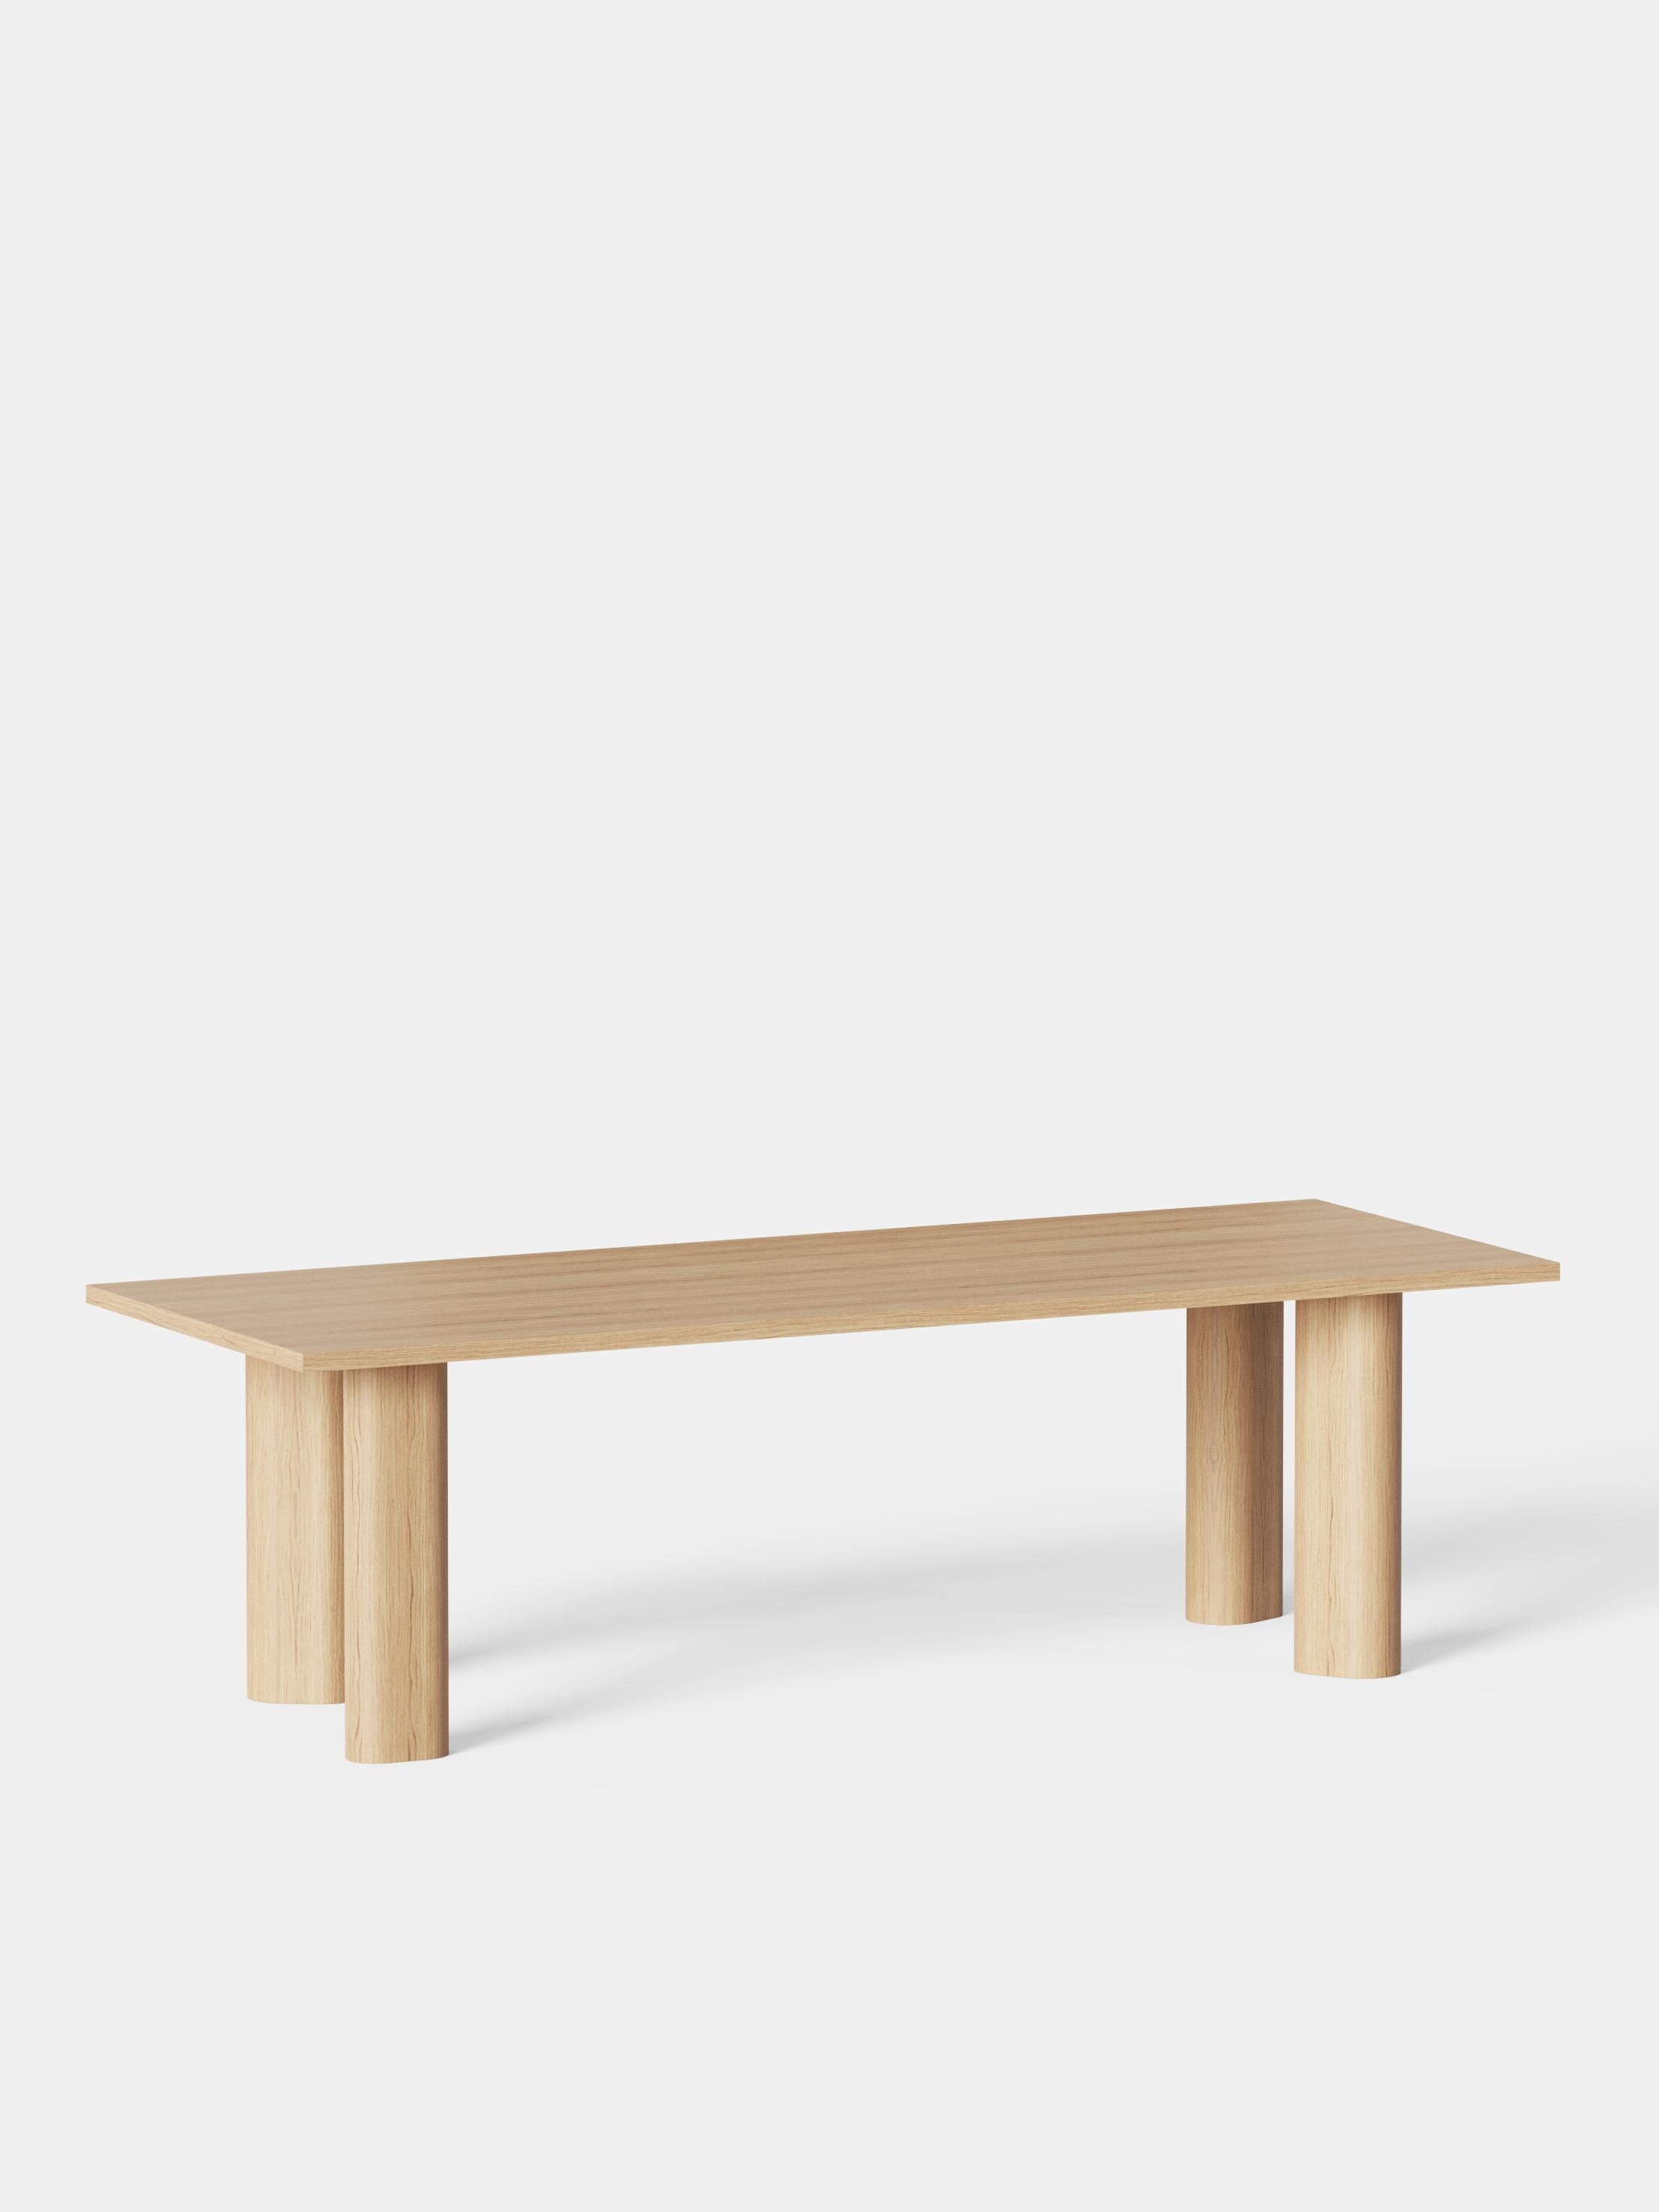 Galta Forte 240 Oak Dining Table by Kann Design
Dimensions: D 90 x W 240 x H 72 cm.
Materials: Natural oak.

The Galta Forte dining table takes the signature shape of the Galta collection legs and accentuates it. Its proportions are generous and the